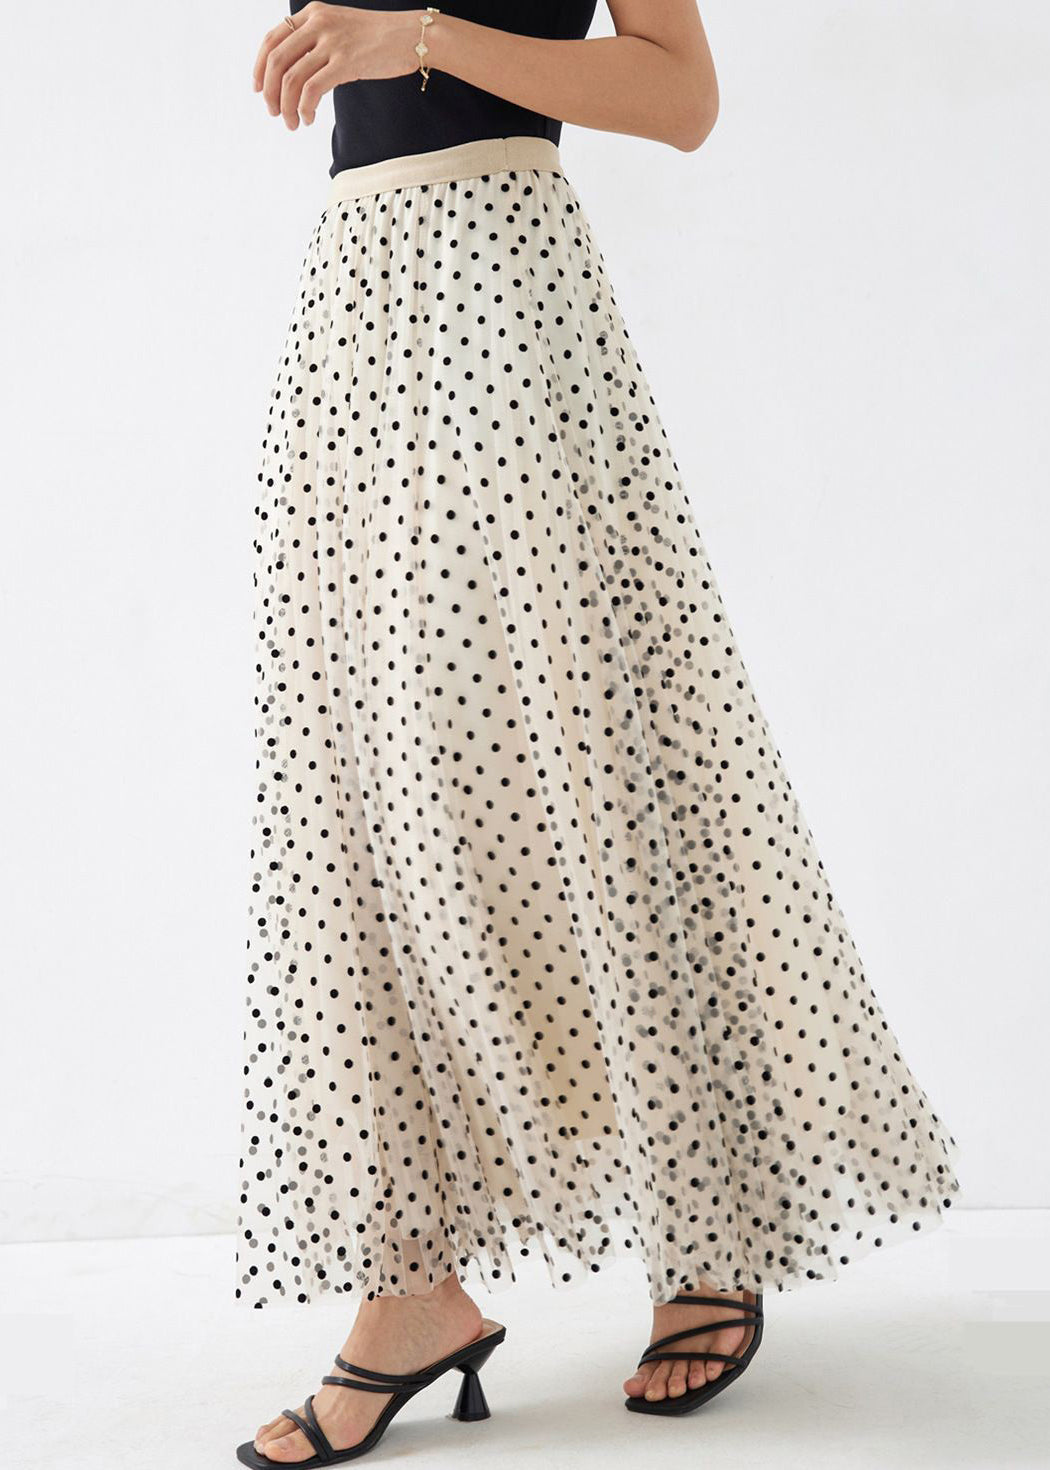 Apricot Print Loose Tulle Skirts High Waist Spring